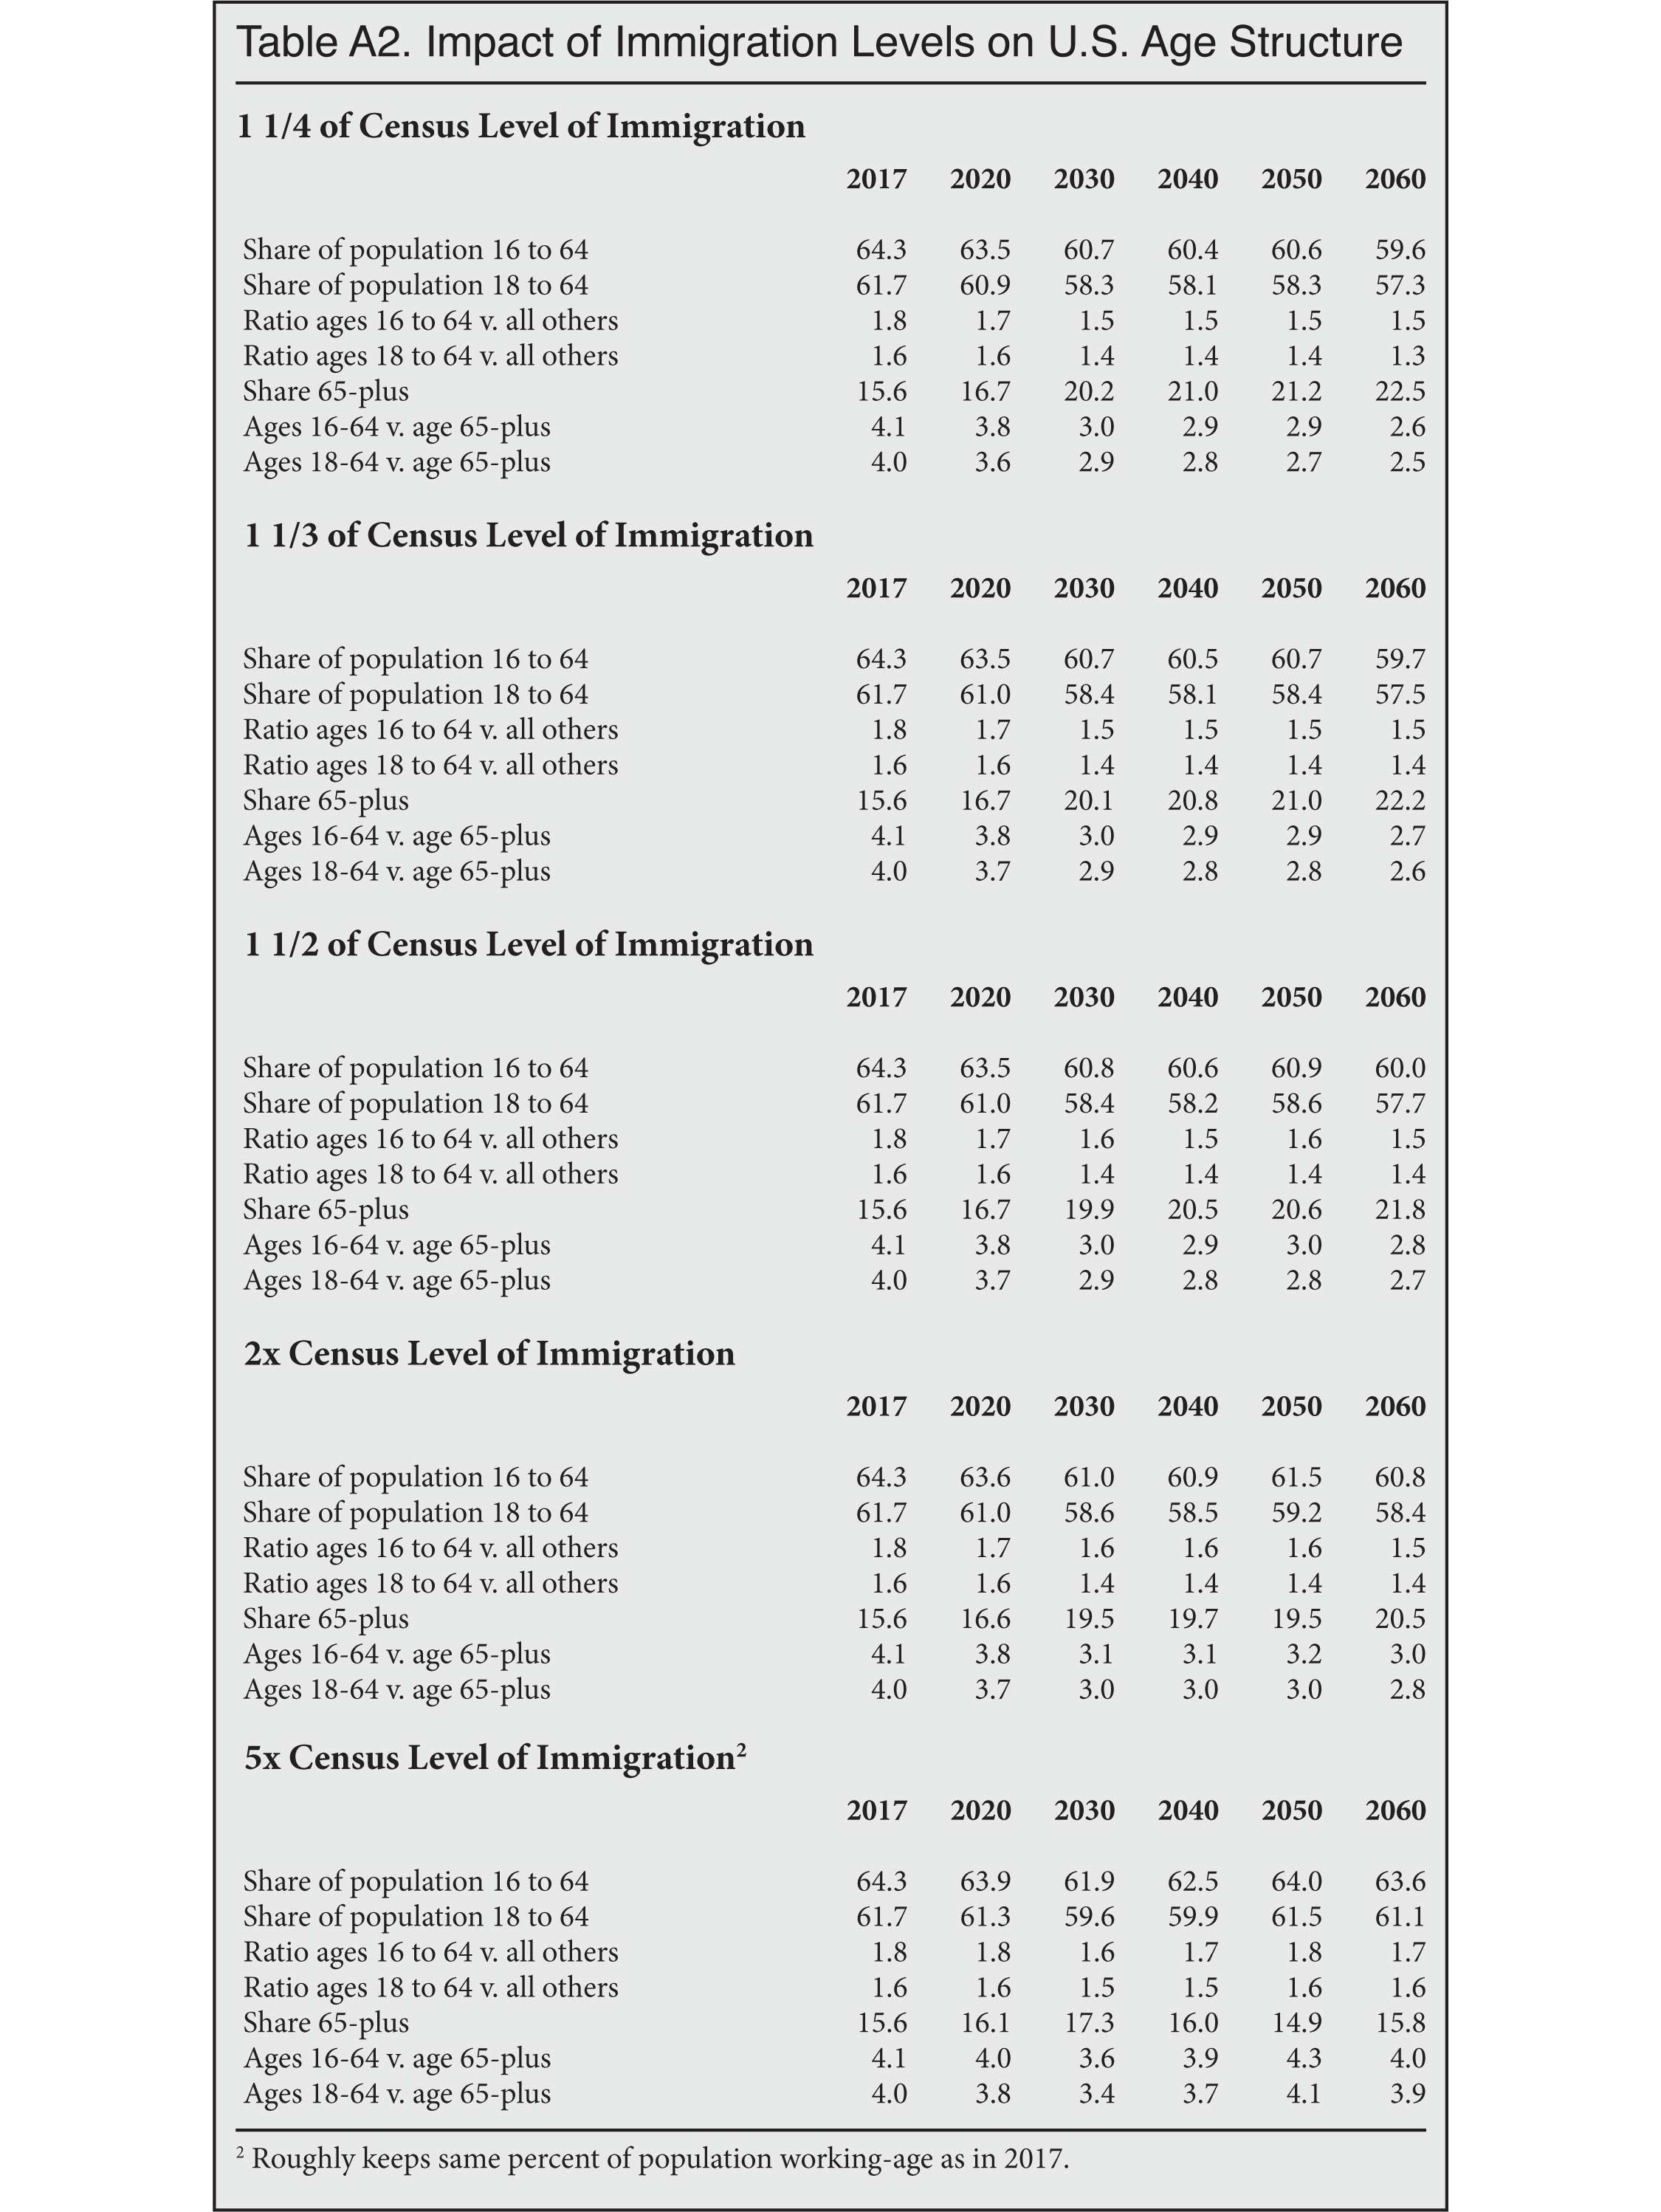 Table: Impact of Immigration on US Age Structure